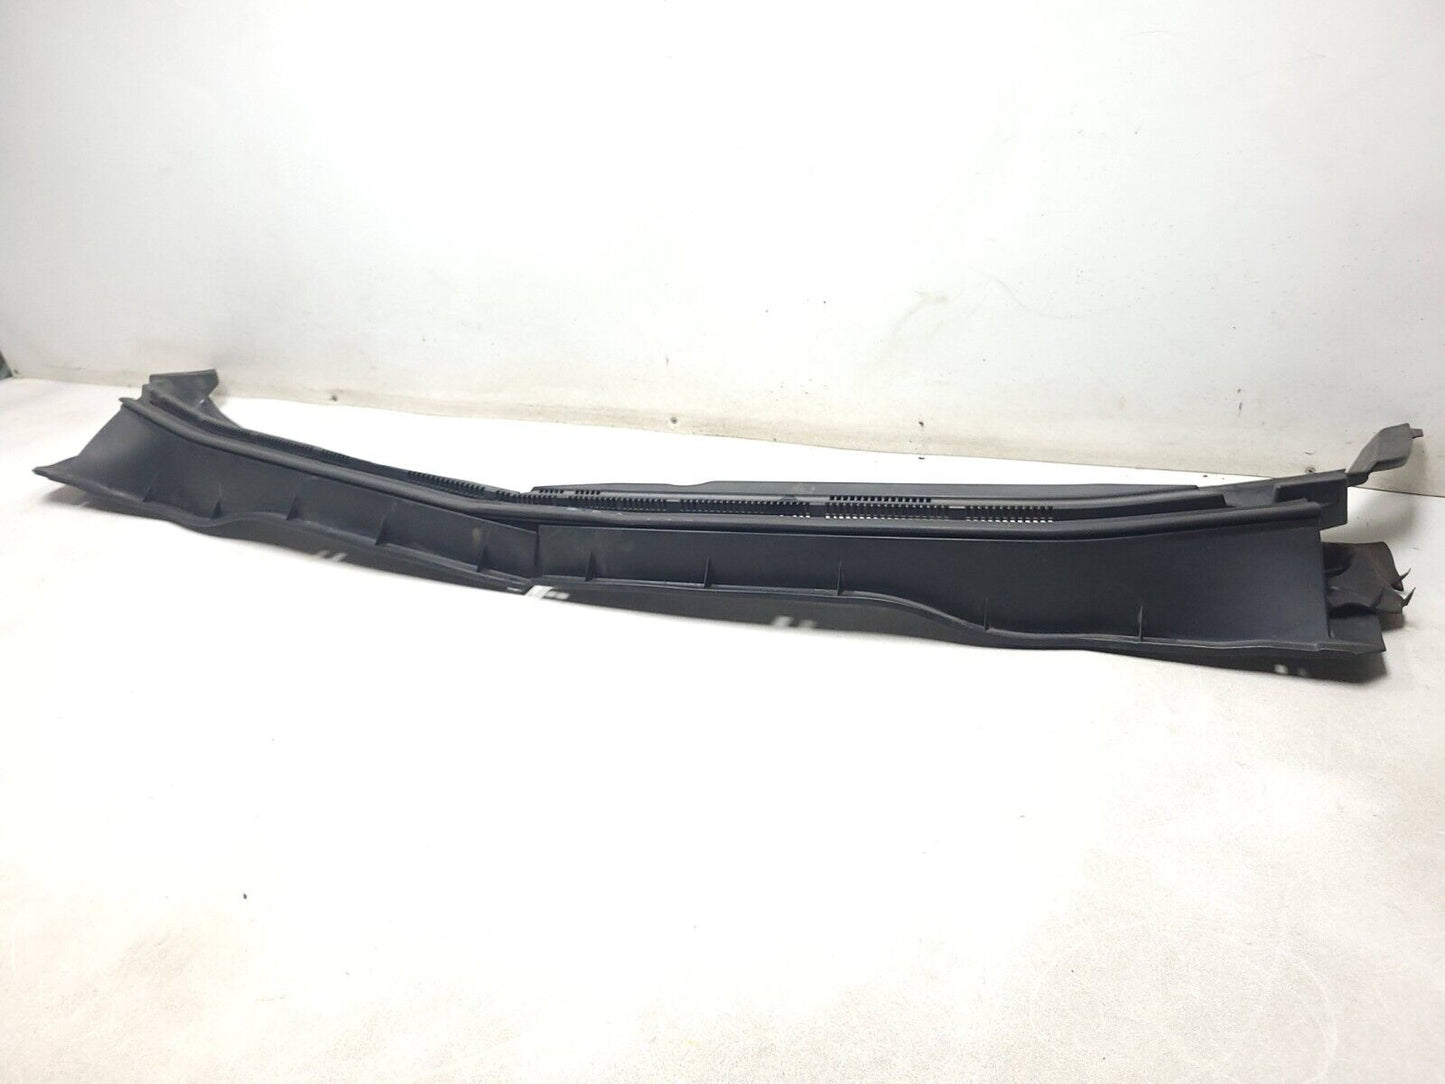 2007 - 2013 Mitsubishi Outlander Windshield Wiper Cowl Panel Cover Grille OEM